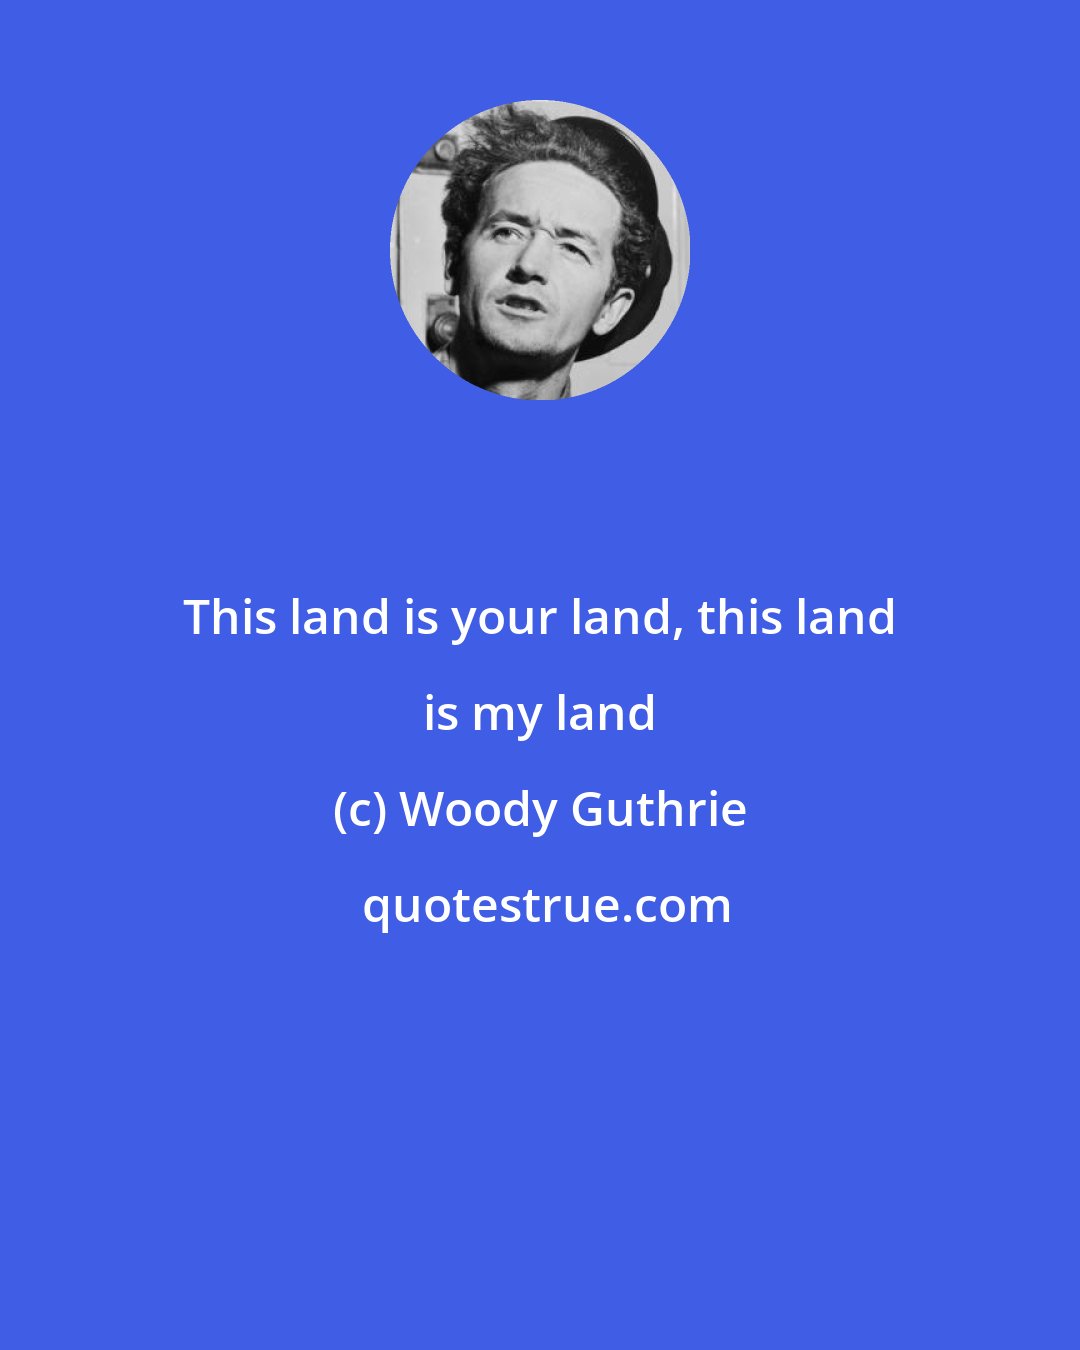 Woody Guthrie: This land is your land, this land is my land